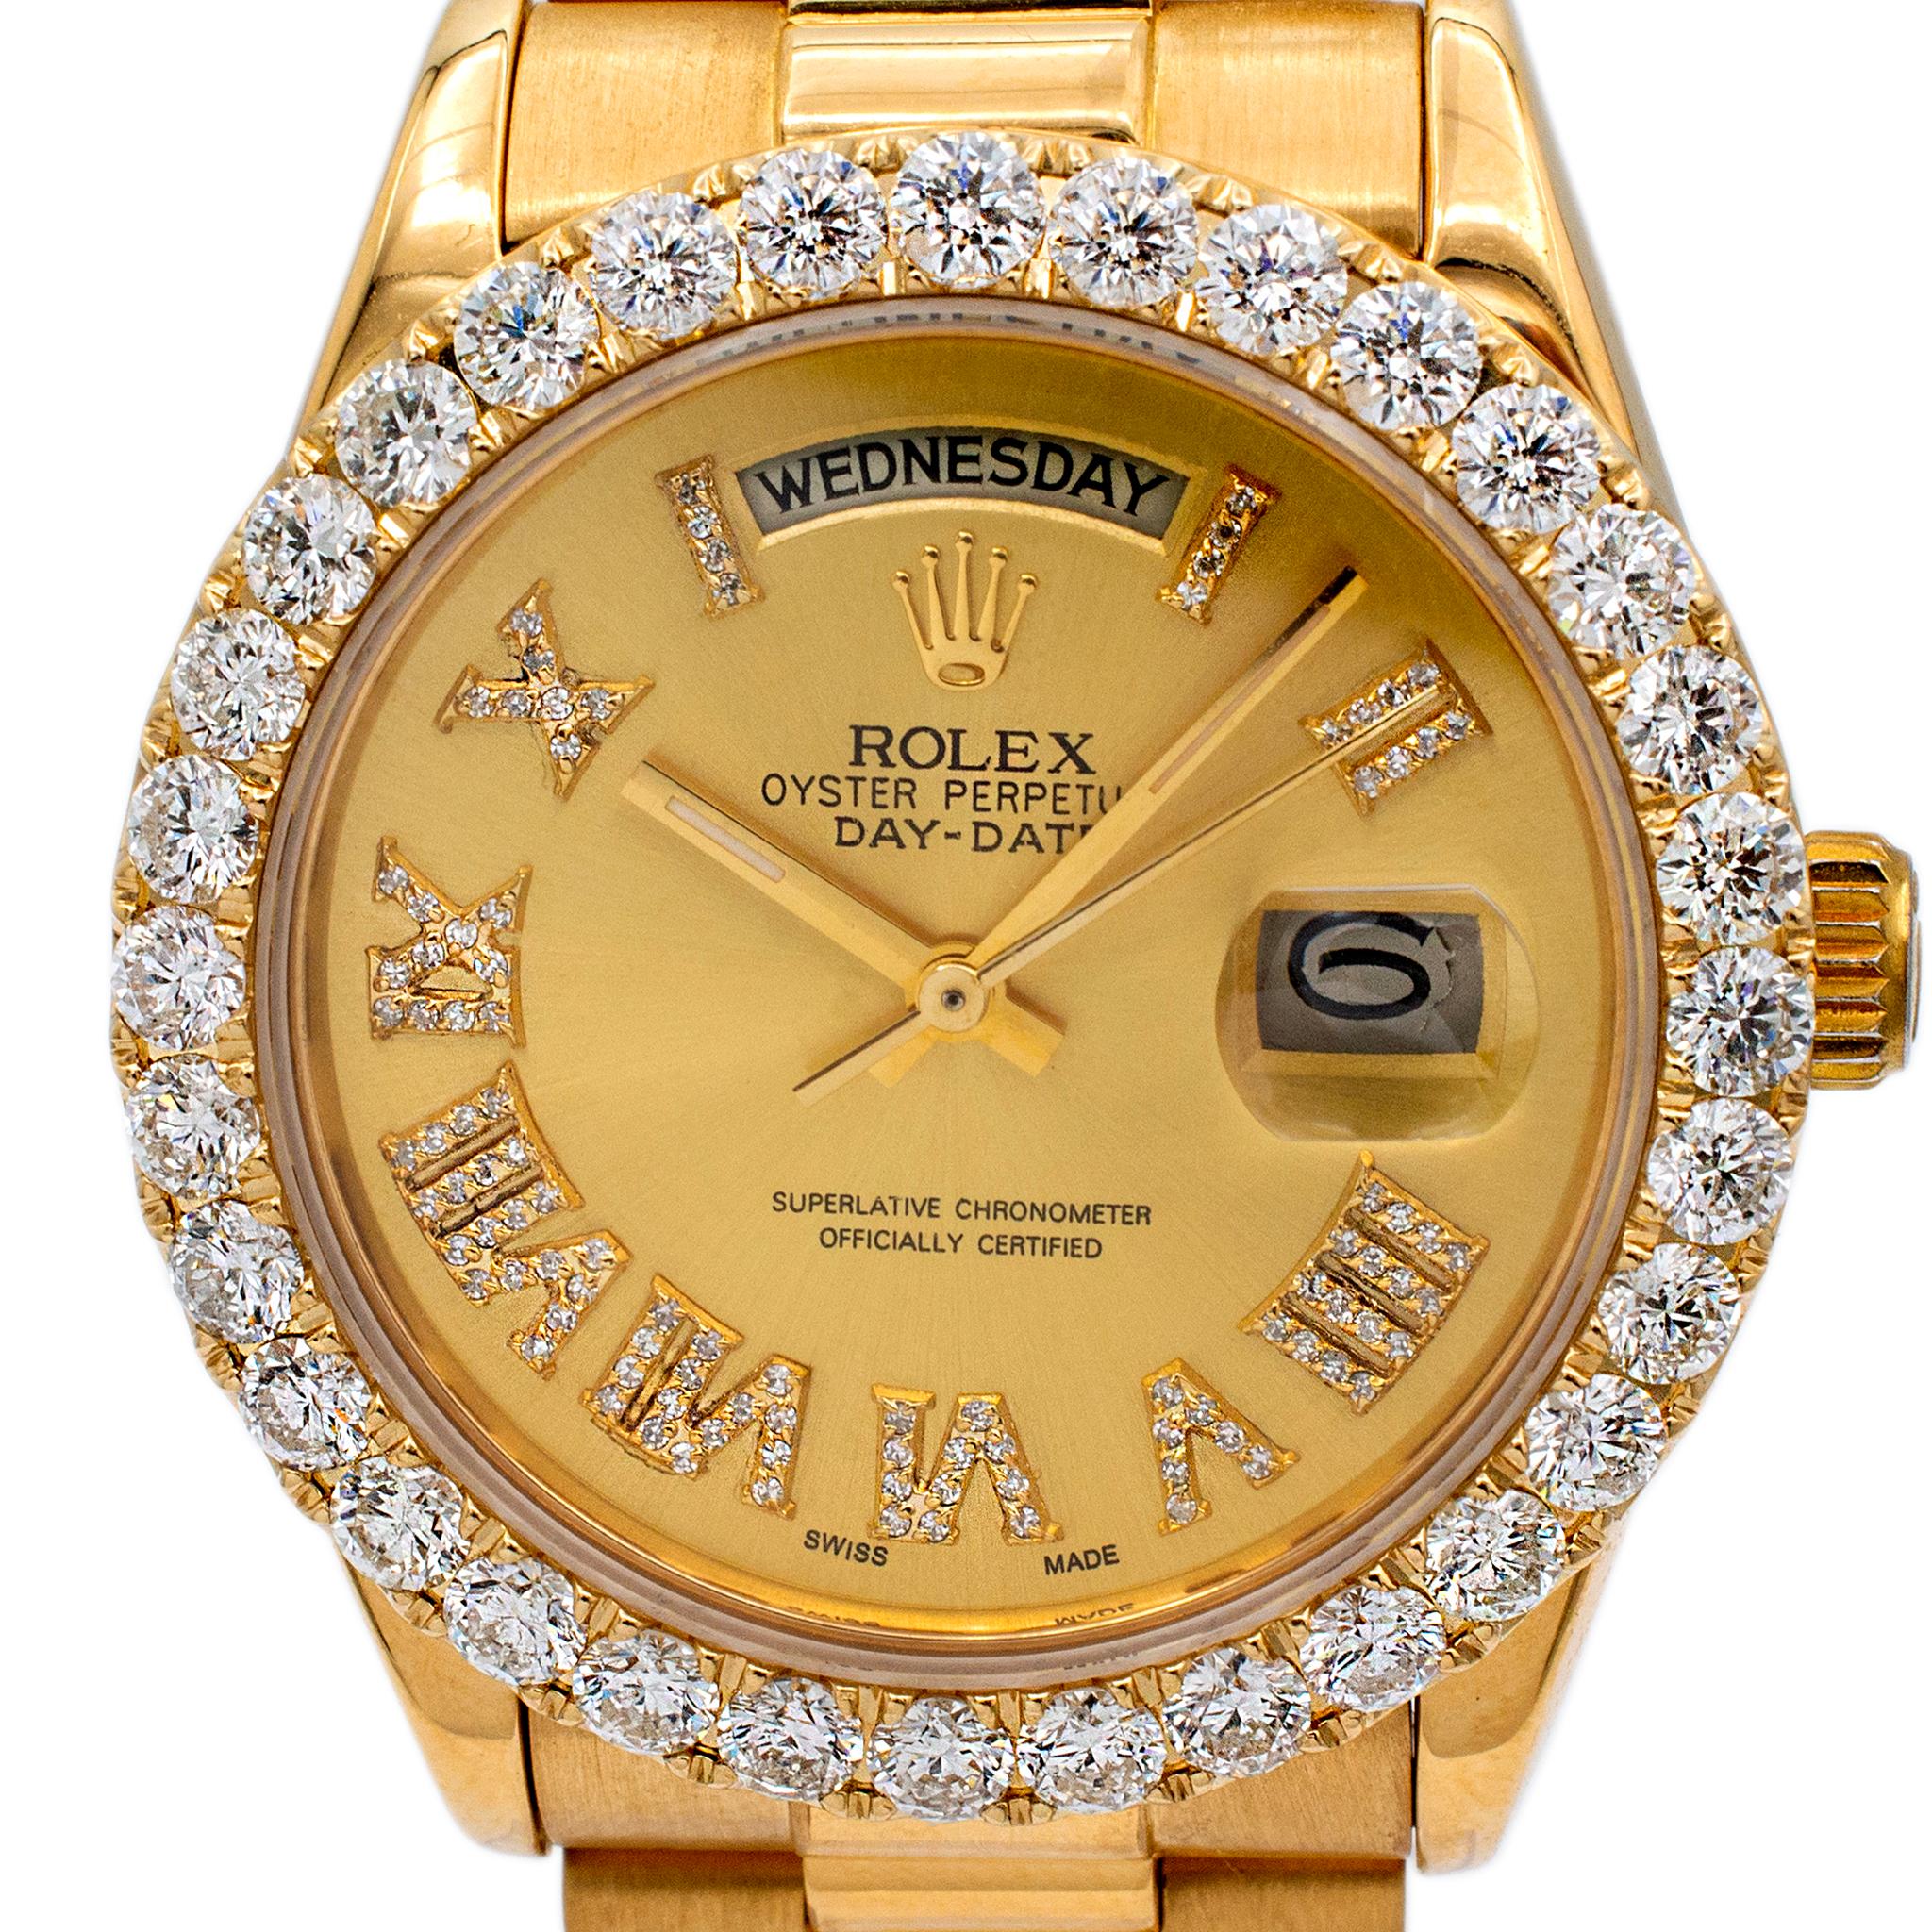 Brand: Rolex
Gender: Mens
Metal Type: 18K Yellow Gold
Length: 6.75 inches
Weight: 131.70 Grams
18K yellow gold diamond ROLEX Swiss made watch with original box and is equipped with a hidden deployment clasp.. The 